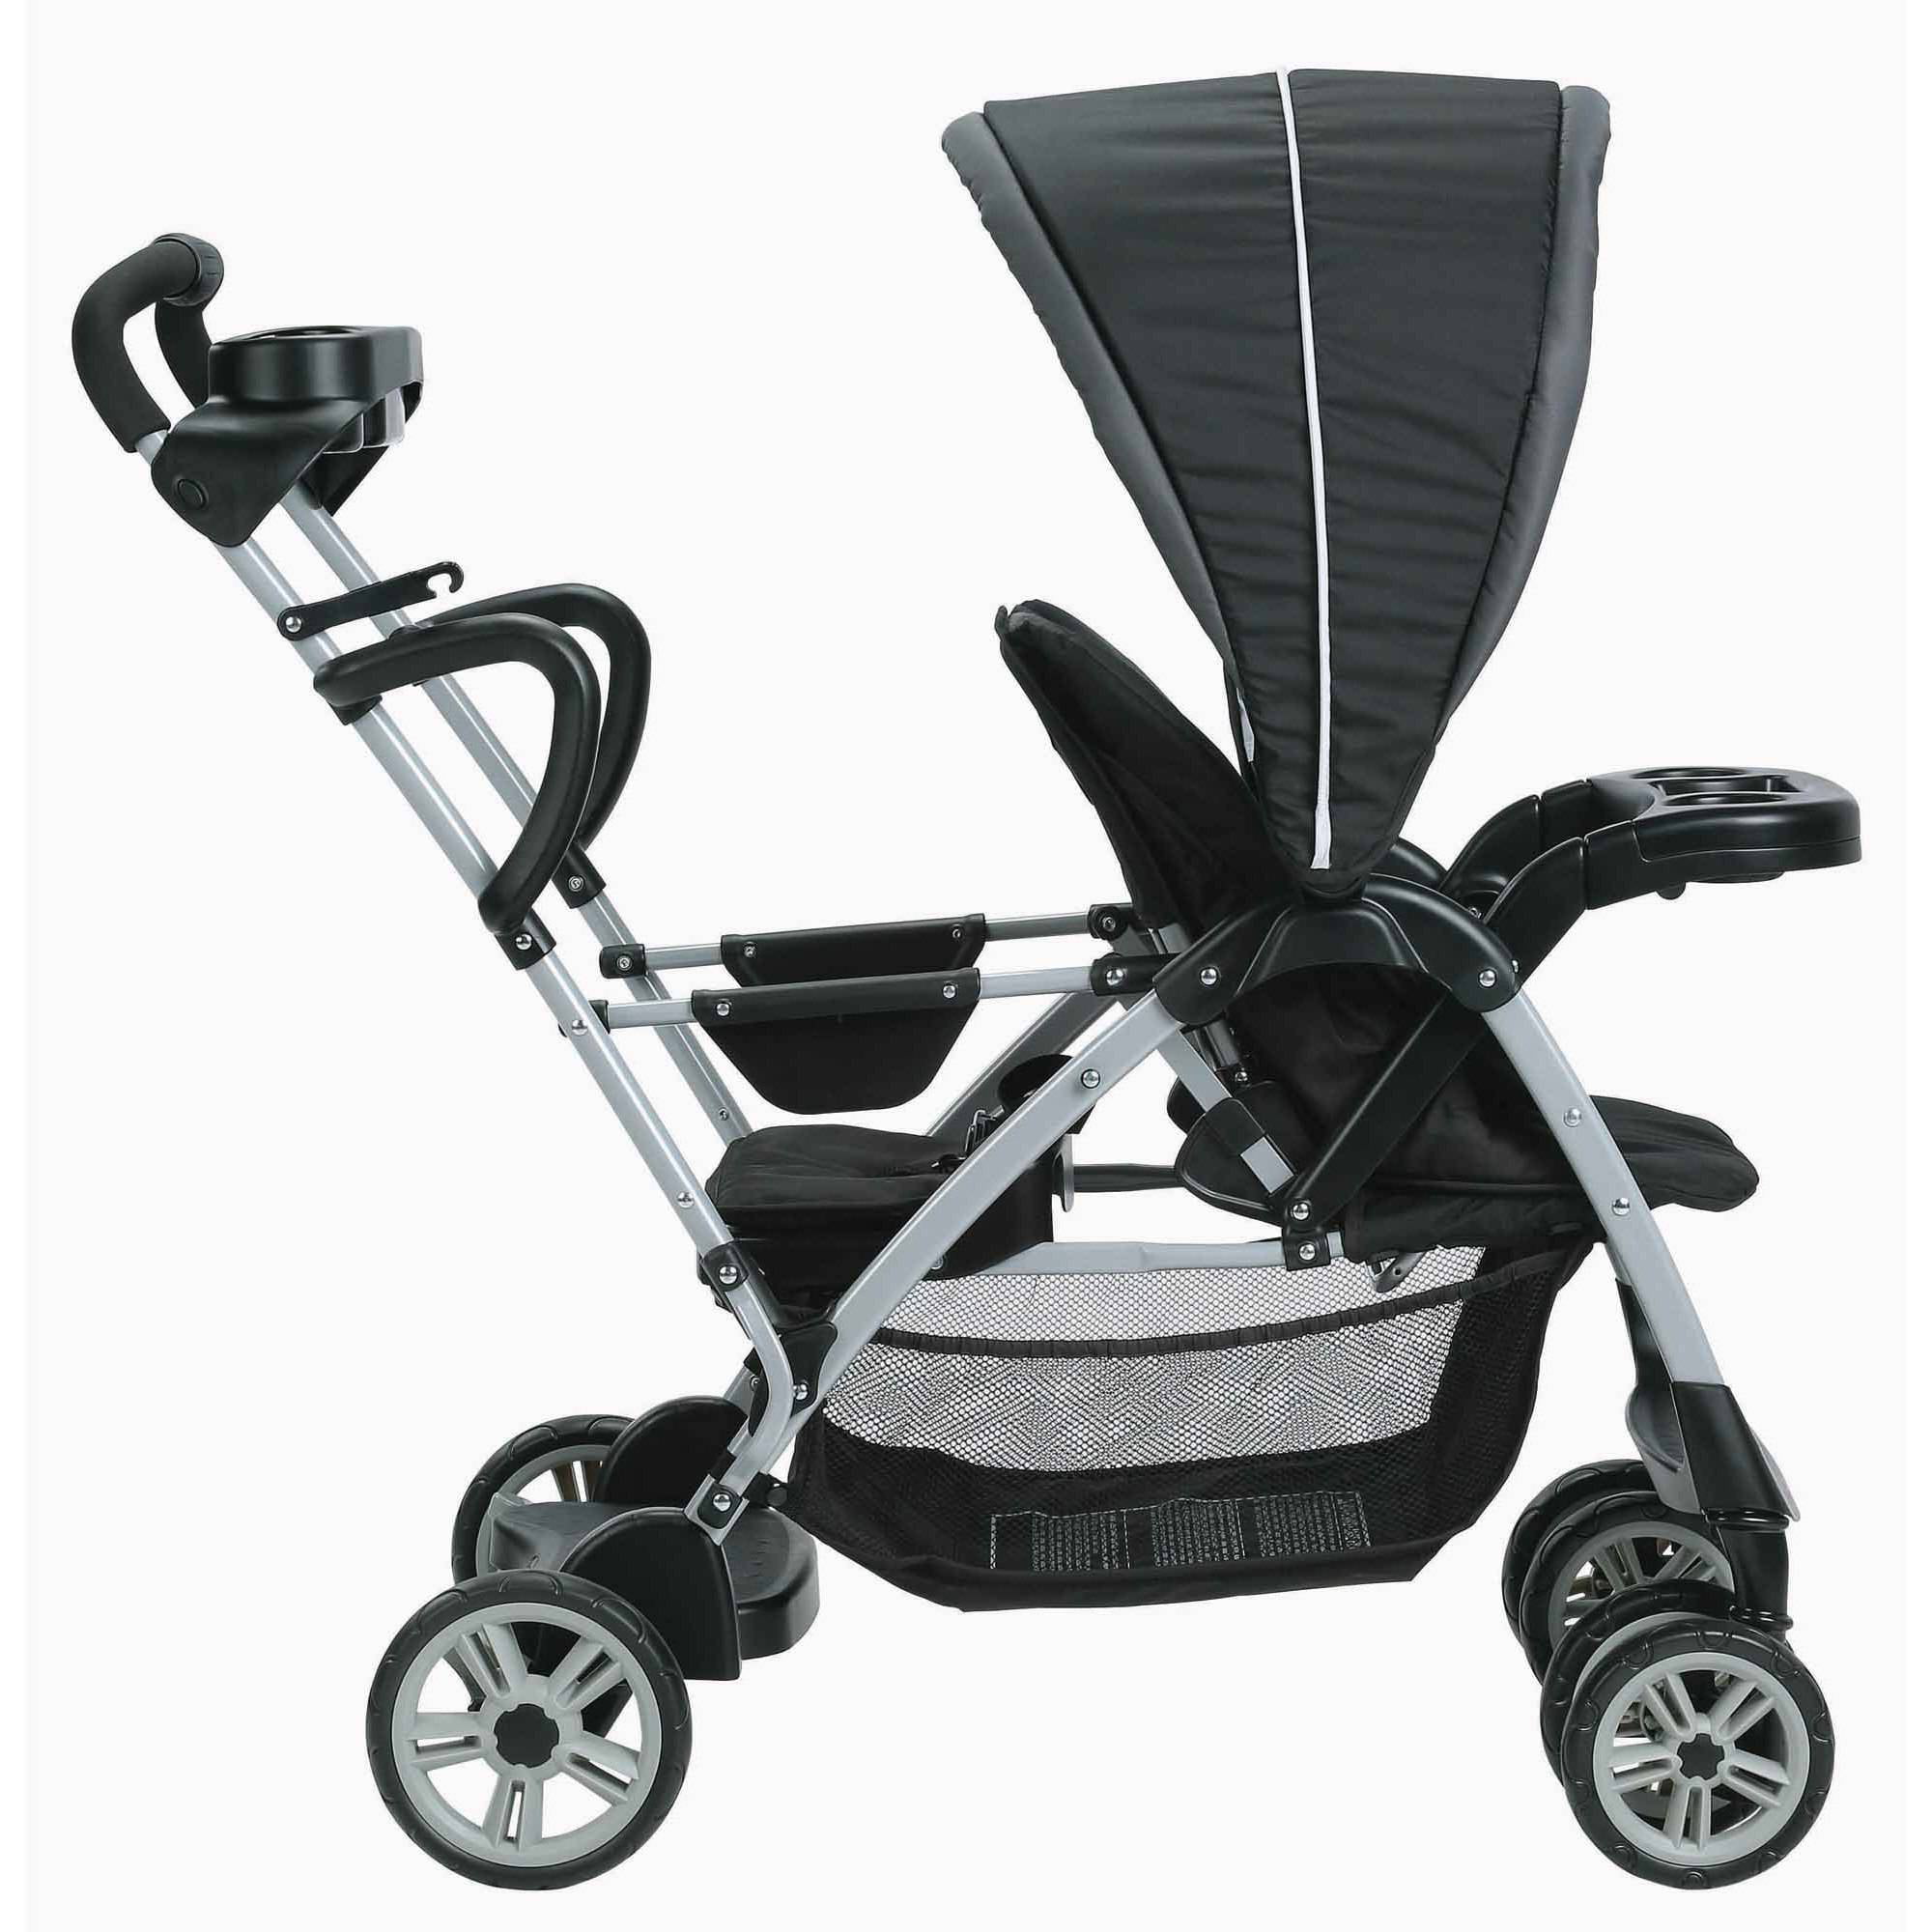 Graco Roomfor2 Click Connect Stand and Ride Stroller Gotham 1 